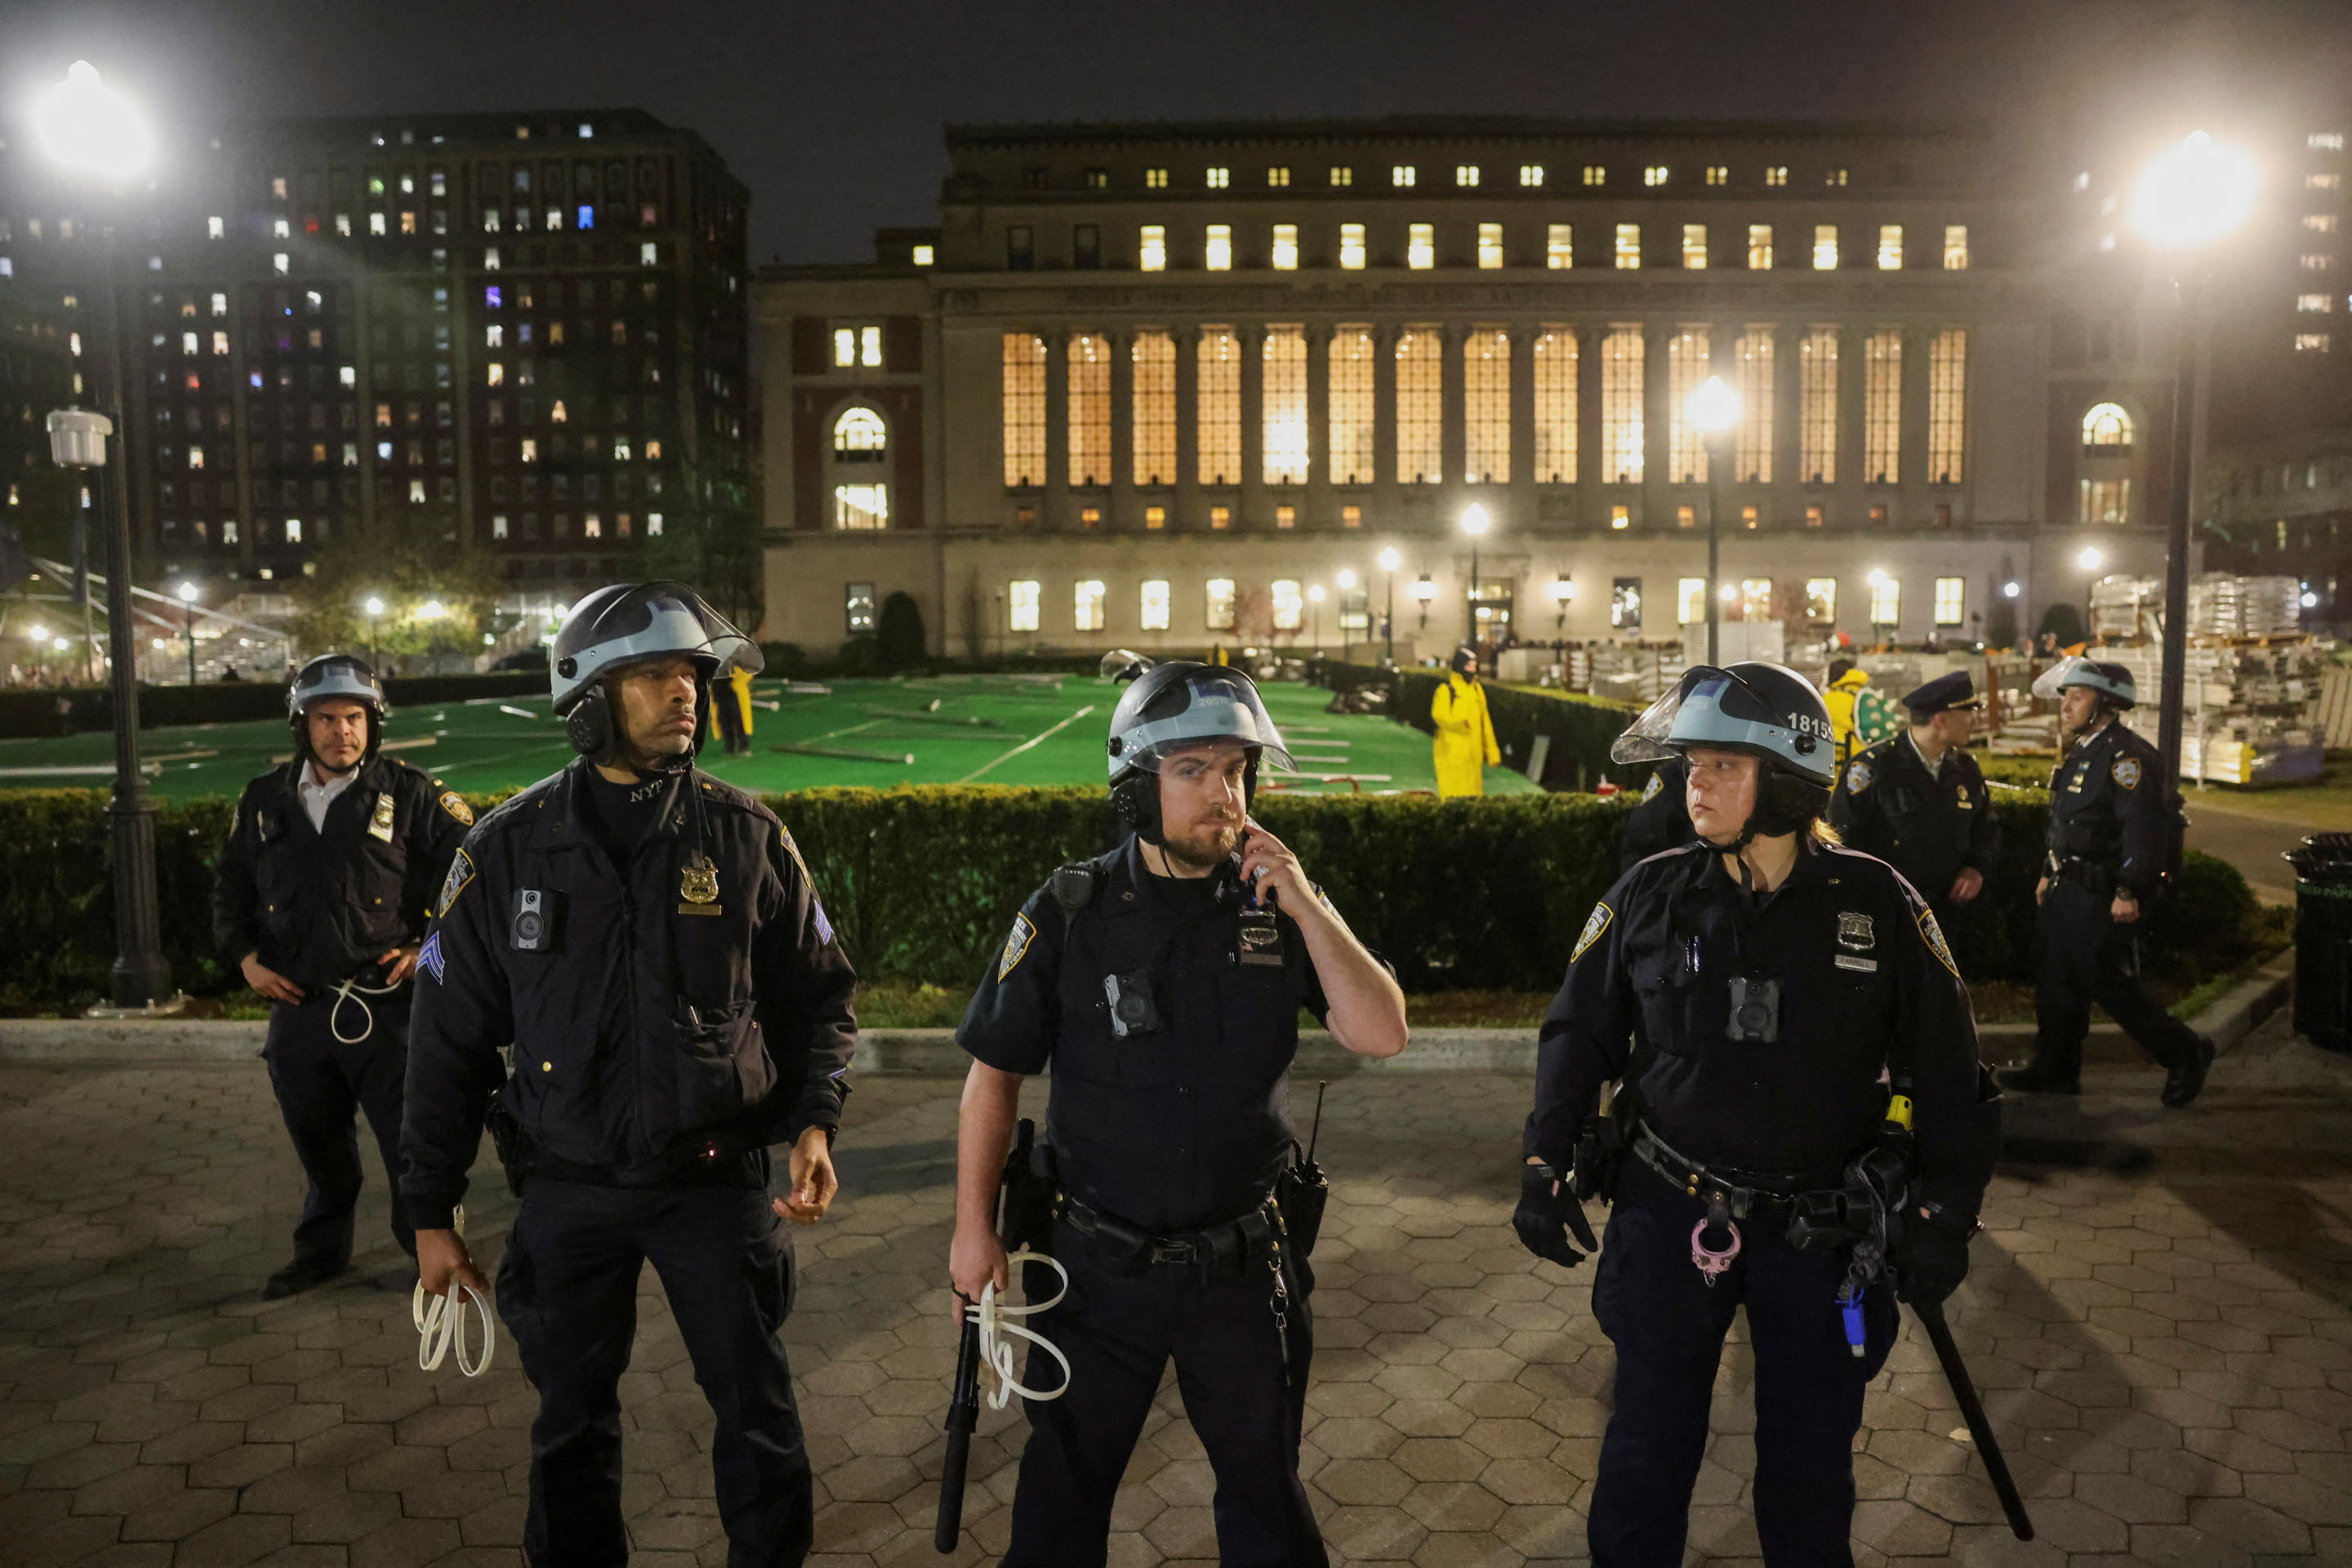 Police stand guard at Columbia University.